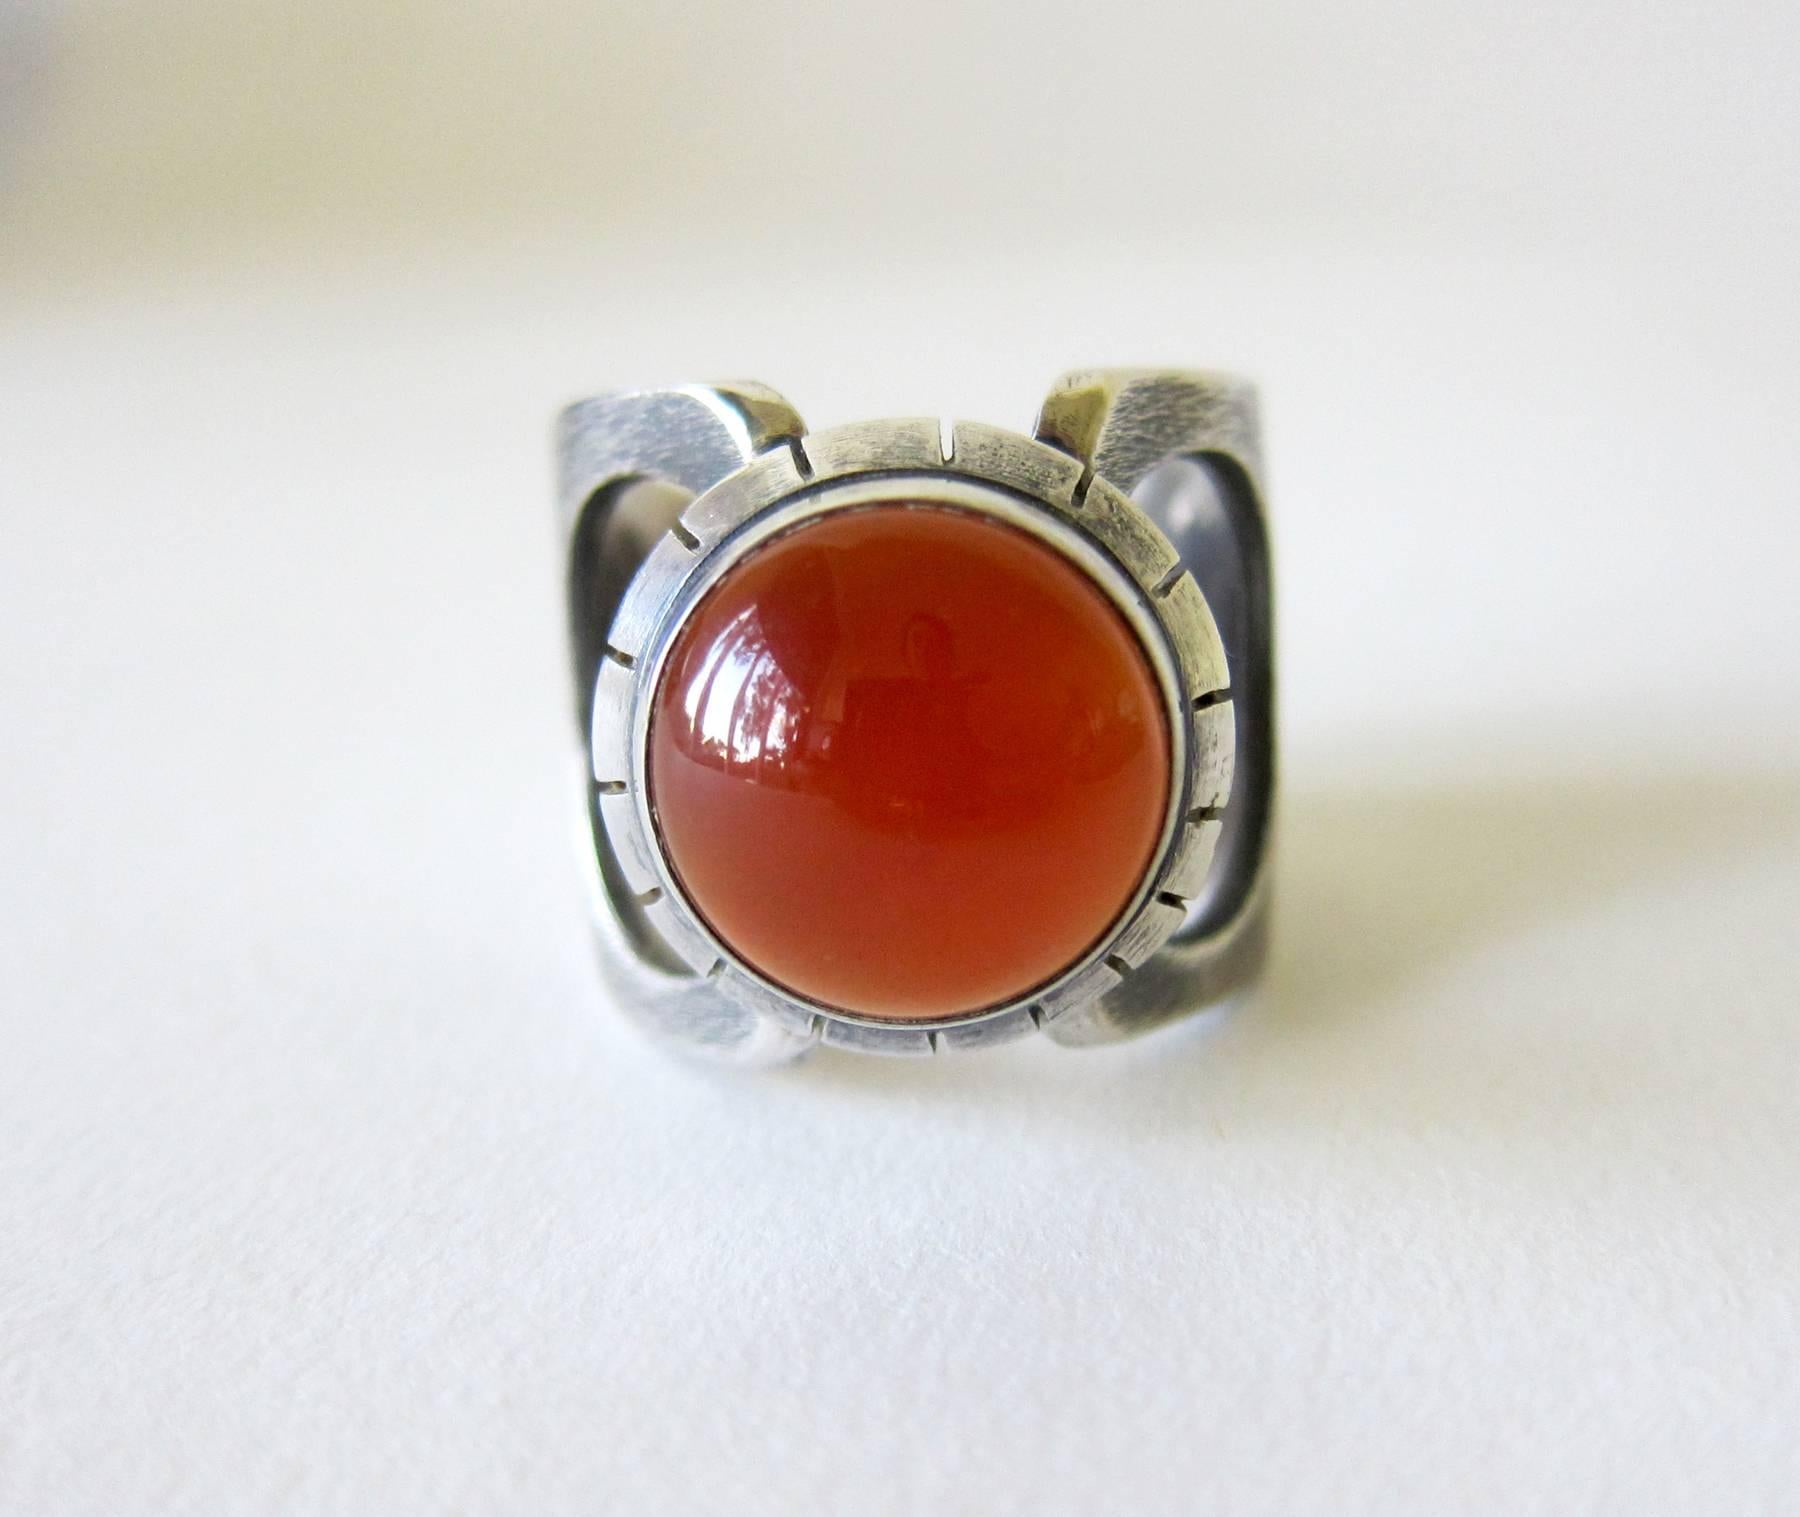 Handmade sterling silver modernist ring with carnelian cabochon created by James Parker of San Diego, California.  Ring is a finger size 11 to 11.5 and is signed with the artists' cypher of a conjoined JP.  Tests positive for silver and suitable for